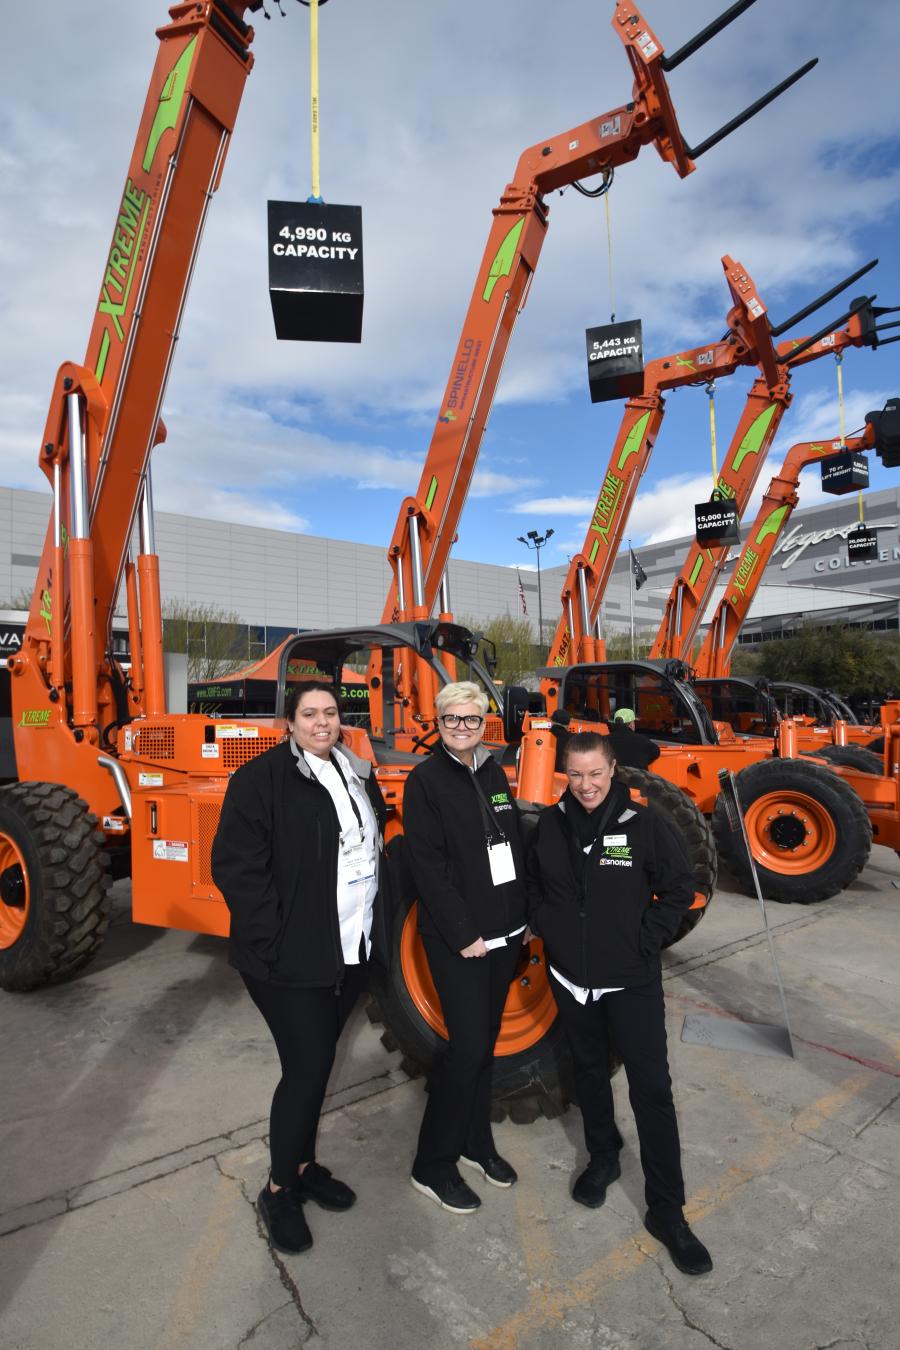 Xtreme Manufacturing, a supplier of telehandlers to the North American market, occupied its traditional outdoor space at WOC 2023. Pictured here are the marketing team of (L-R) Ashley Robles, Barb Canibano and Tiffany Pace. 
(CEG photo)